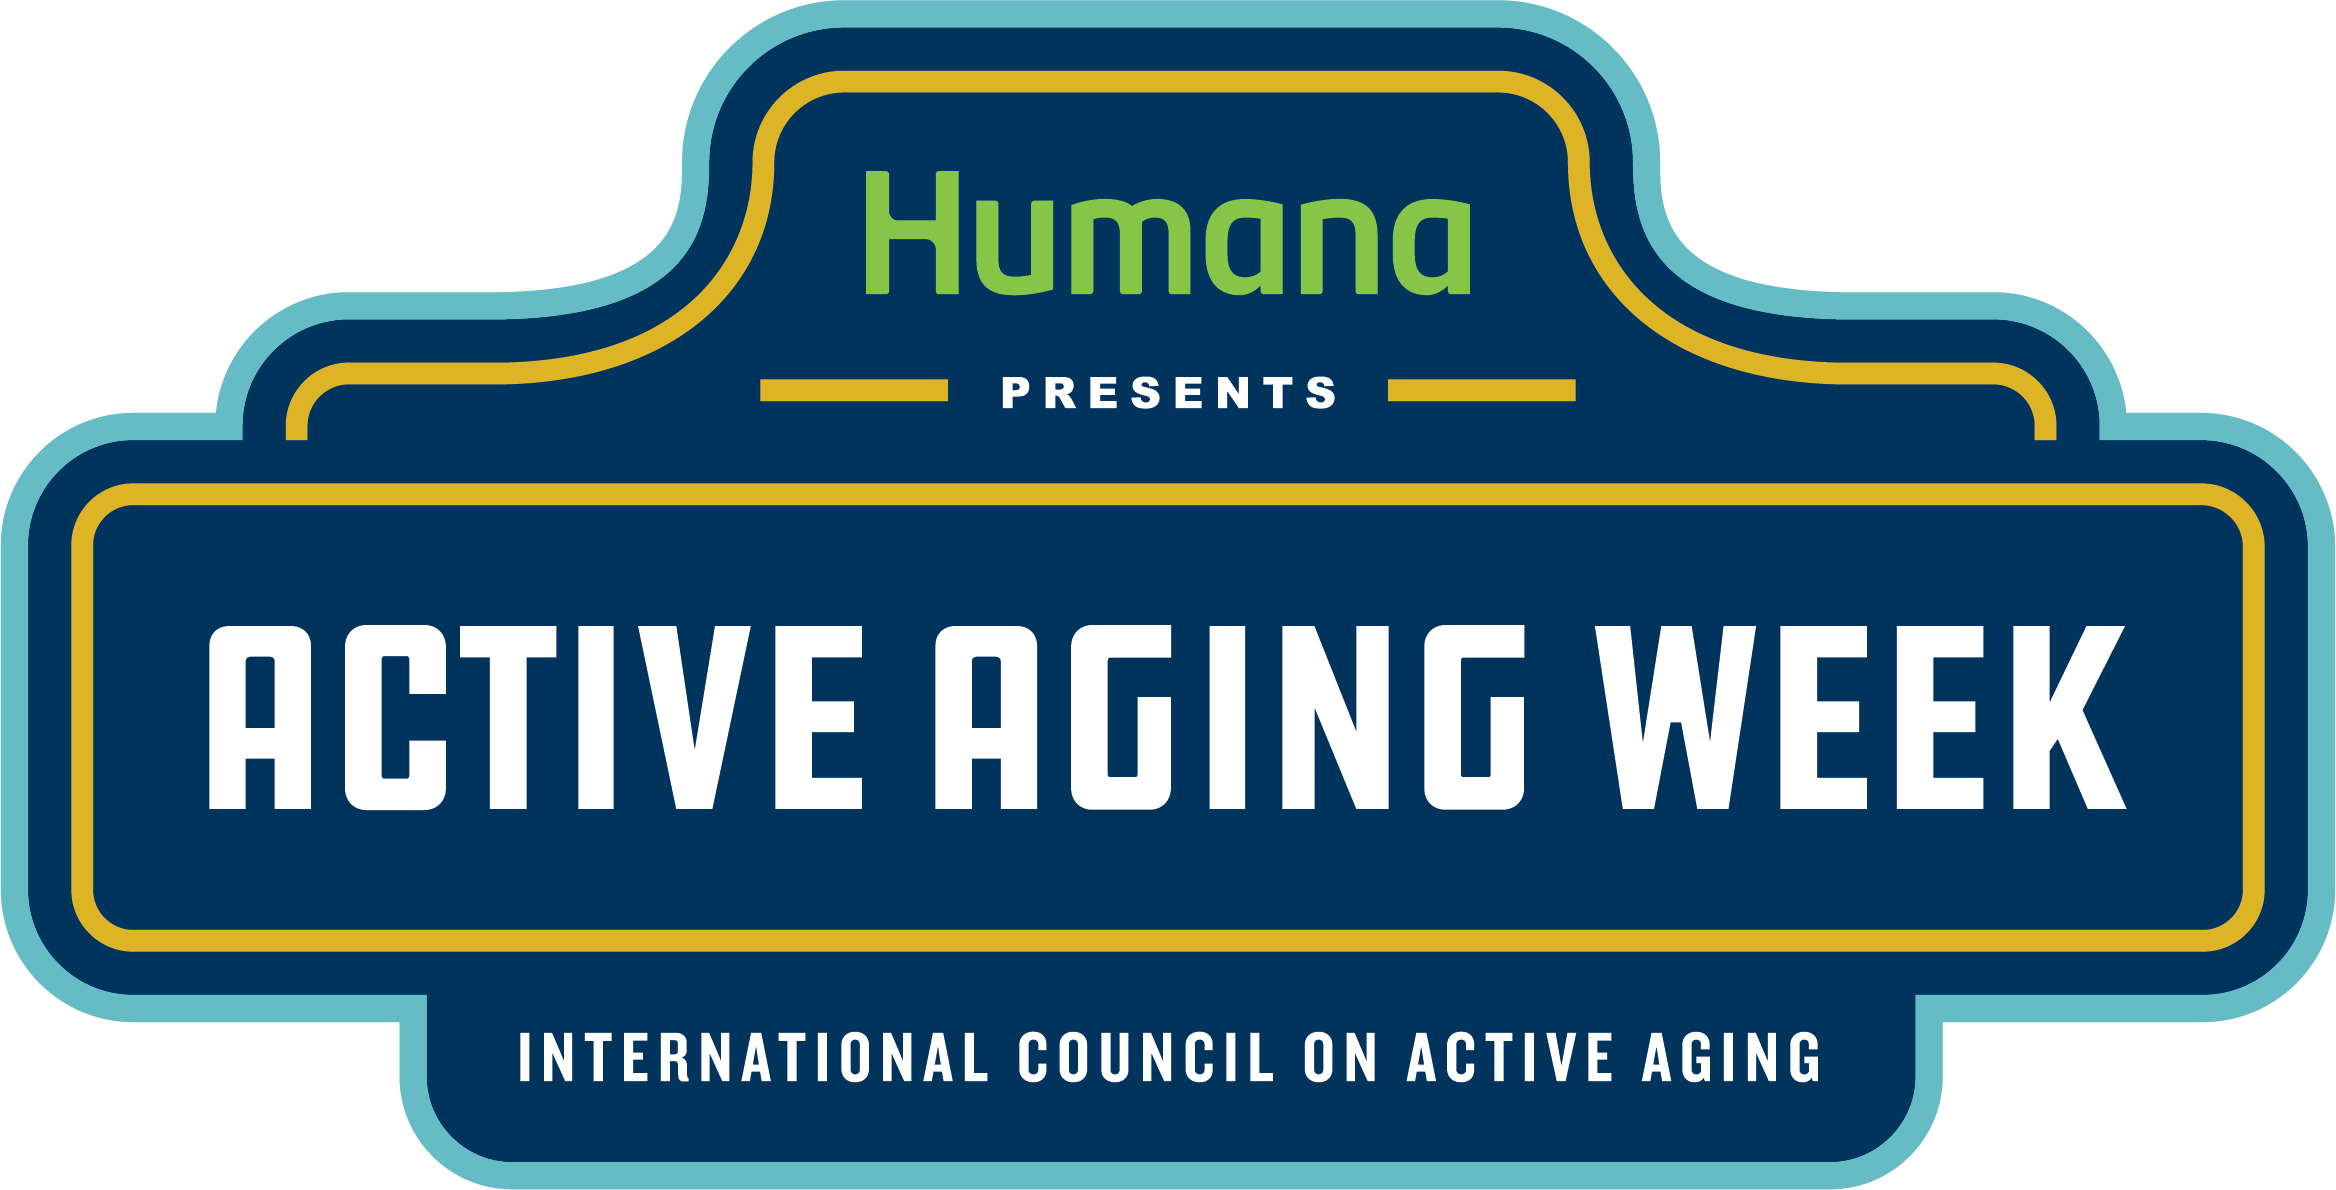 Active Aging Week 2021 Highlights the Importance of Wellness